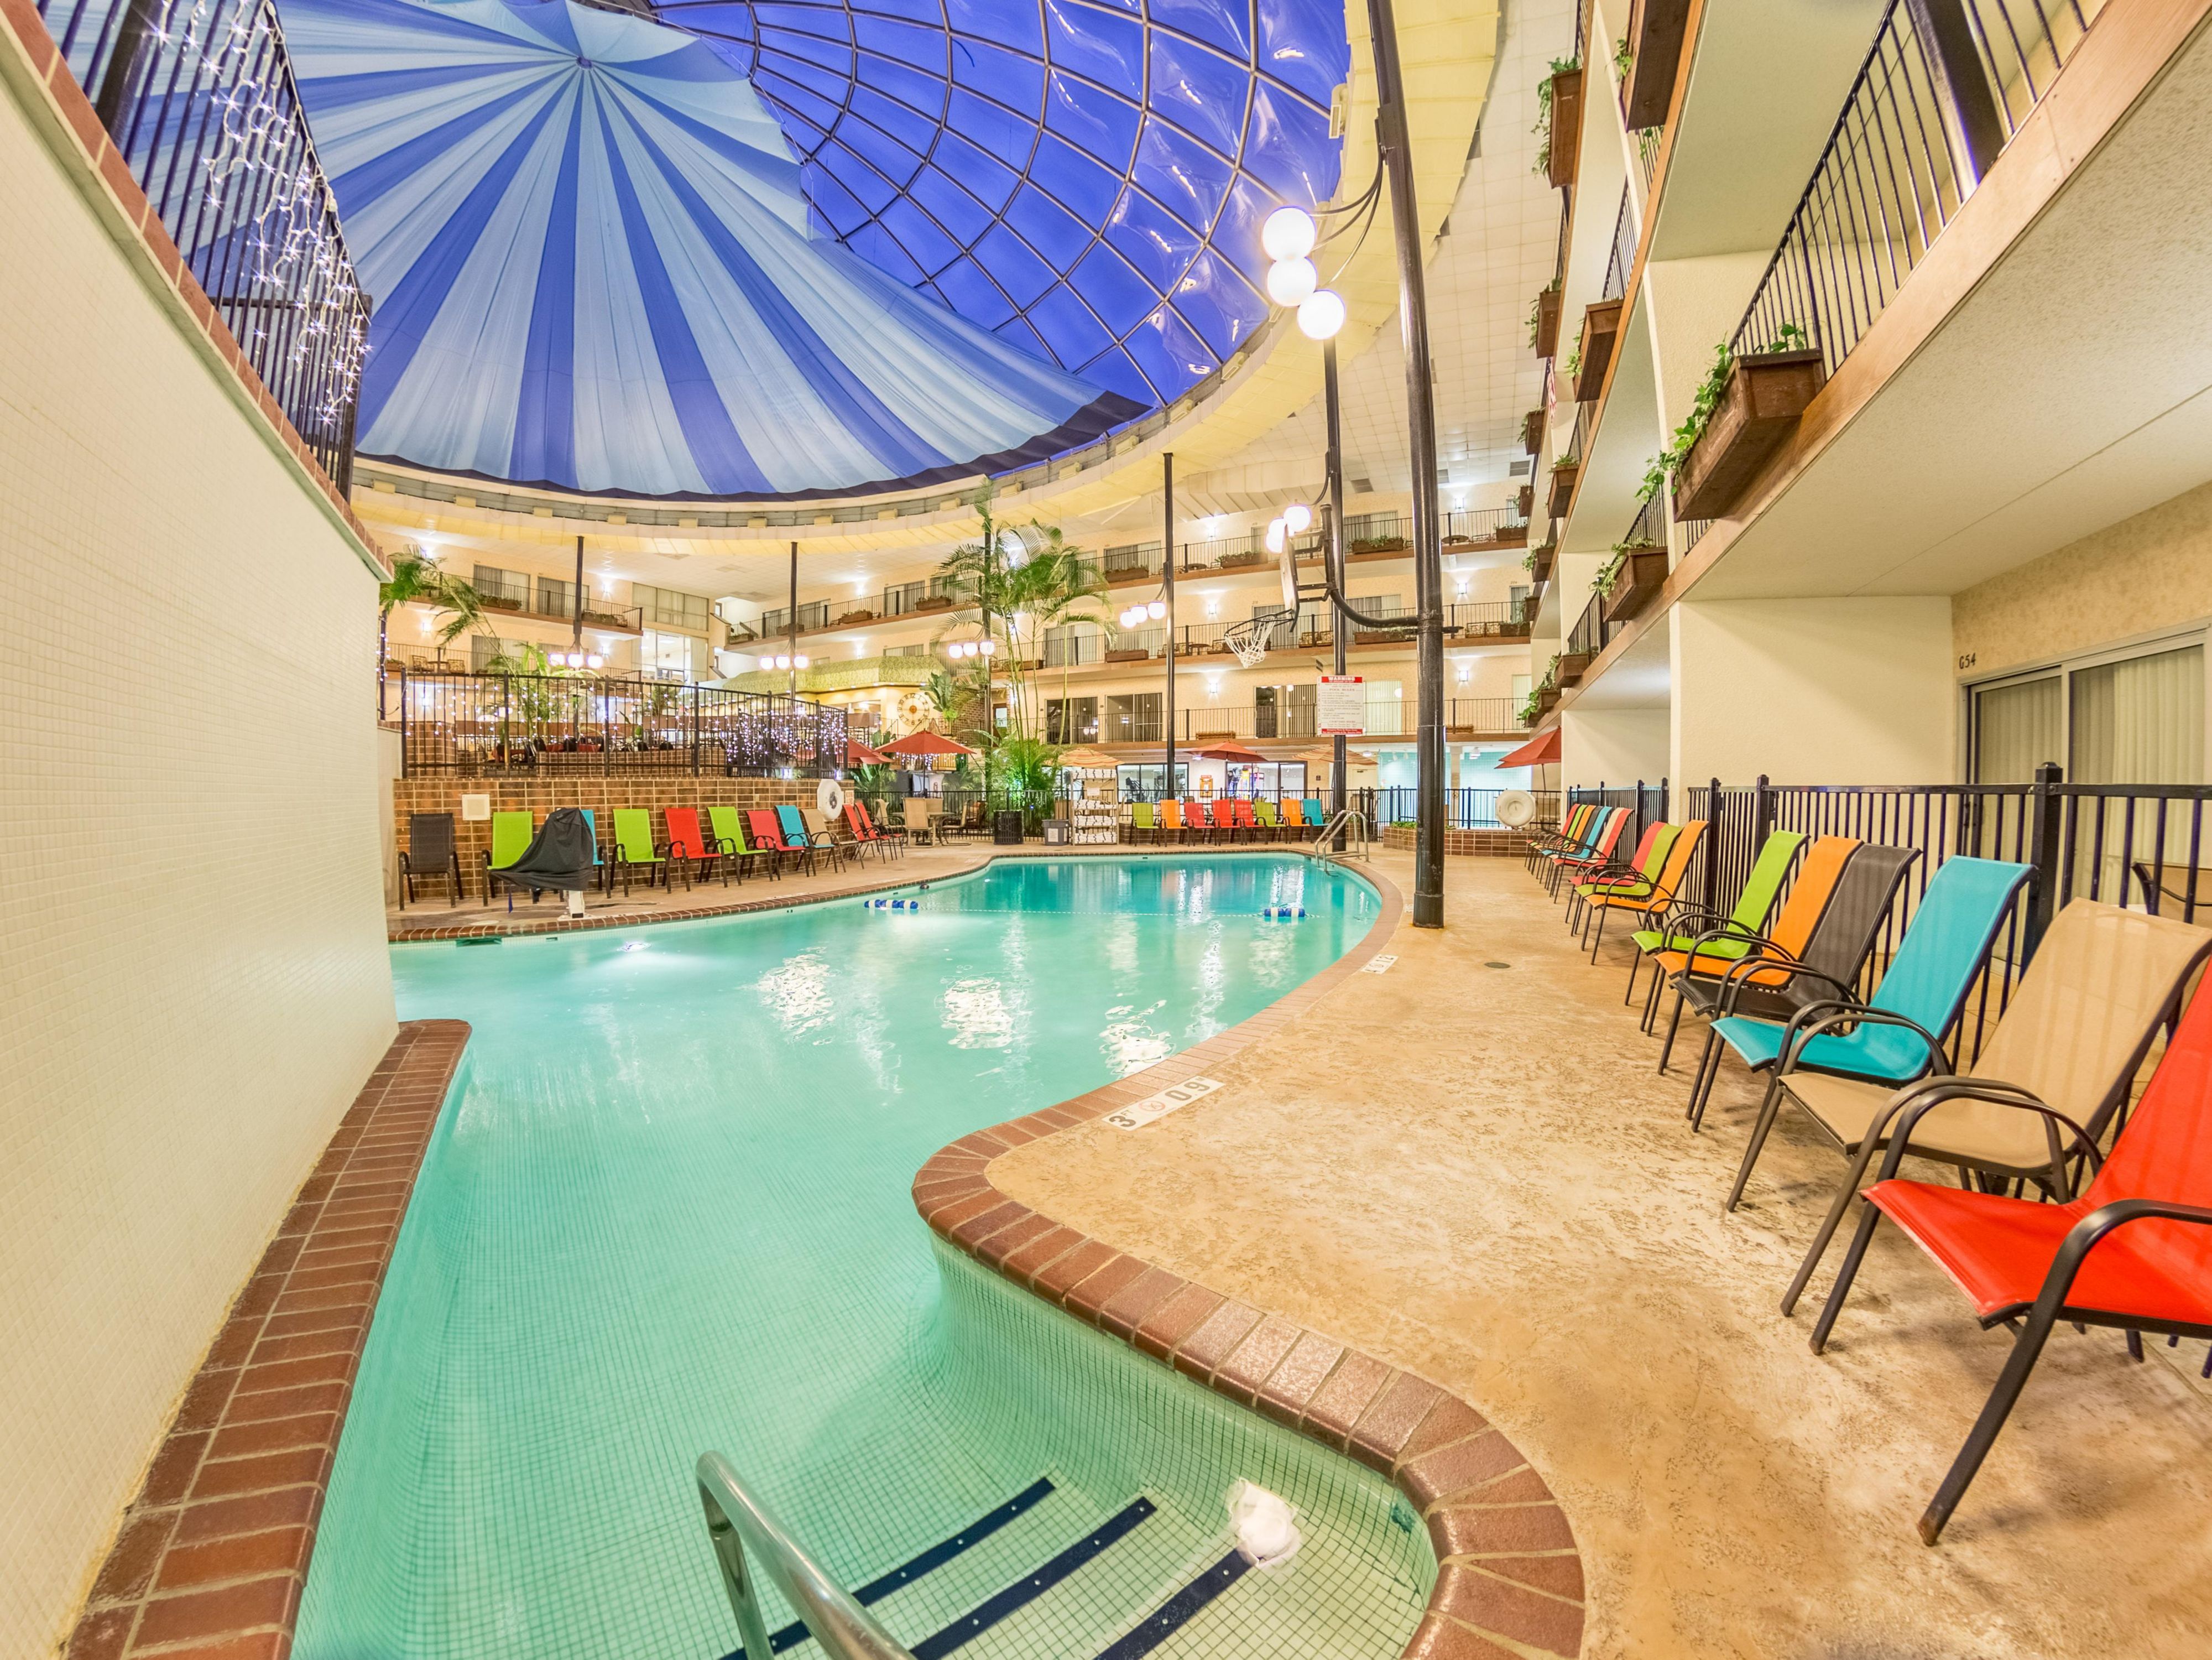 While you are at our hotel, the family will enjoy relaxing in our pool or courtyard, playing ping pong, or enjoying the whirlpool.